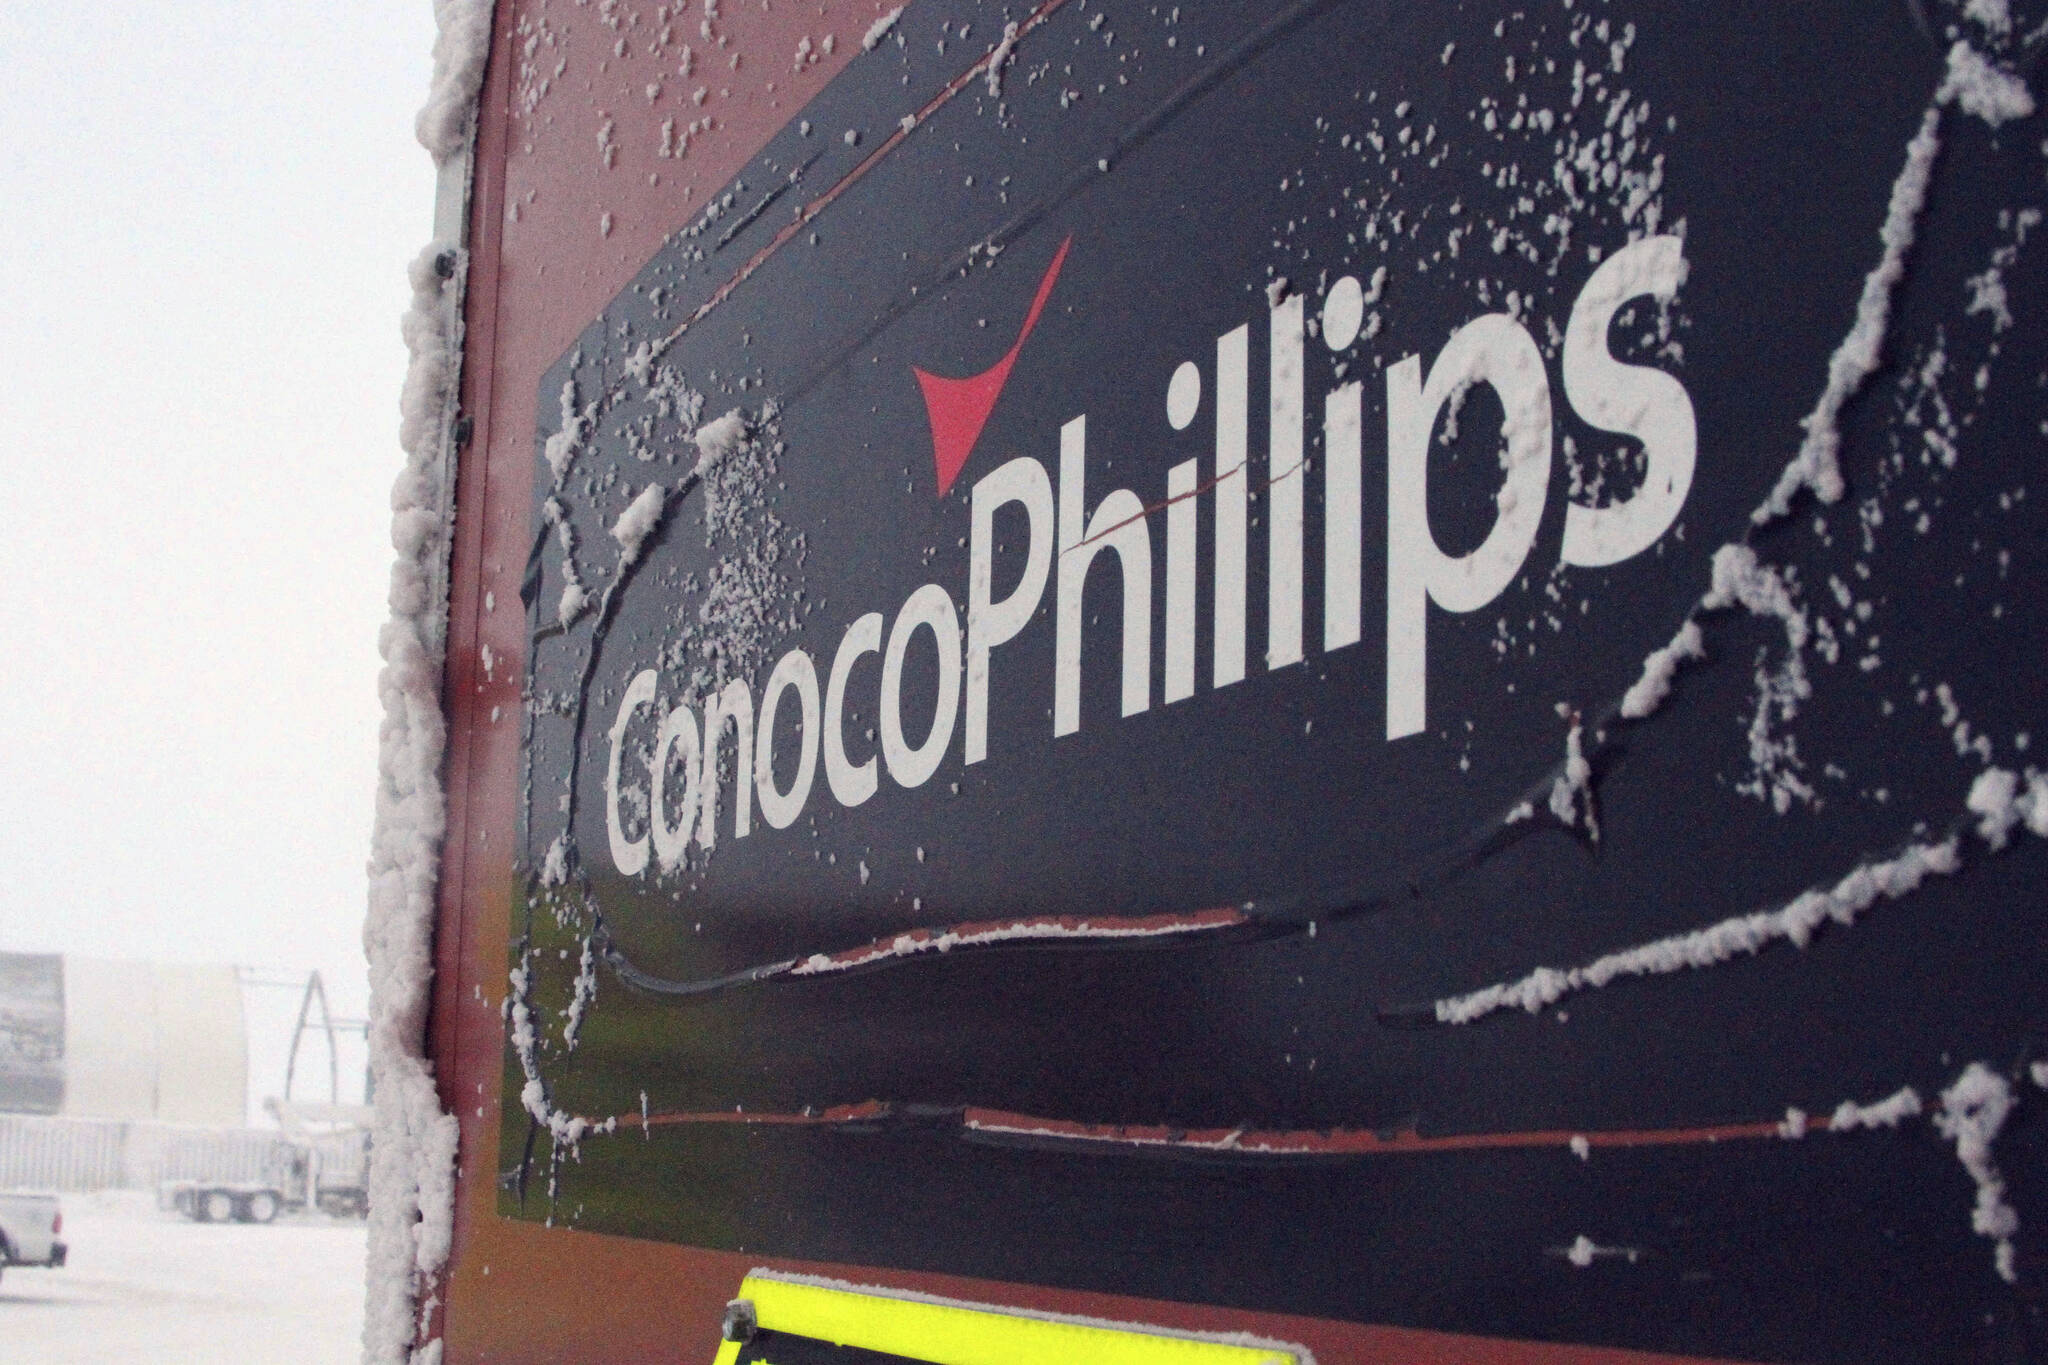 This Feb. 9, 2016, file photo shows an ice-covered ConocoPhillips sign at a drilling site in Nuiqsut, Alaska. Authorities are investigating a natural gas leak detected last week at a ConocoPhillips Alaska oil drill site on Alaska’s North Slope, officials said. Grace Salazar, a special assistant with the Alaska Oil and Gas Conservation Commission, said Wednesday, March 9, 2022, that the commission that oversees oil and gas drilling in the state is investigating the matter. (AP Photo/Mark Thiessen, File)